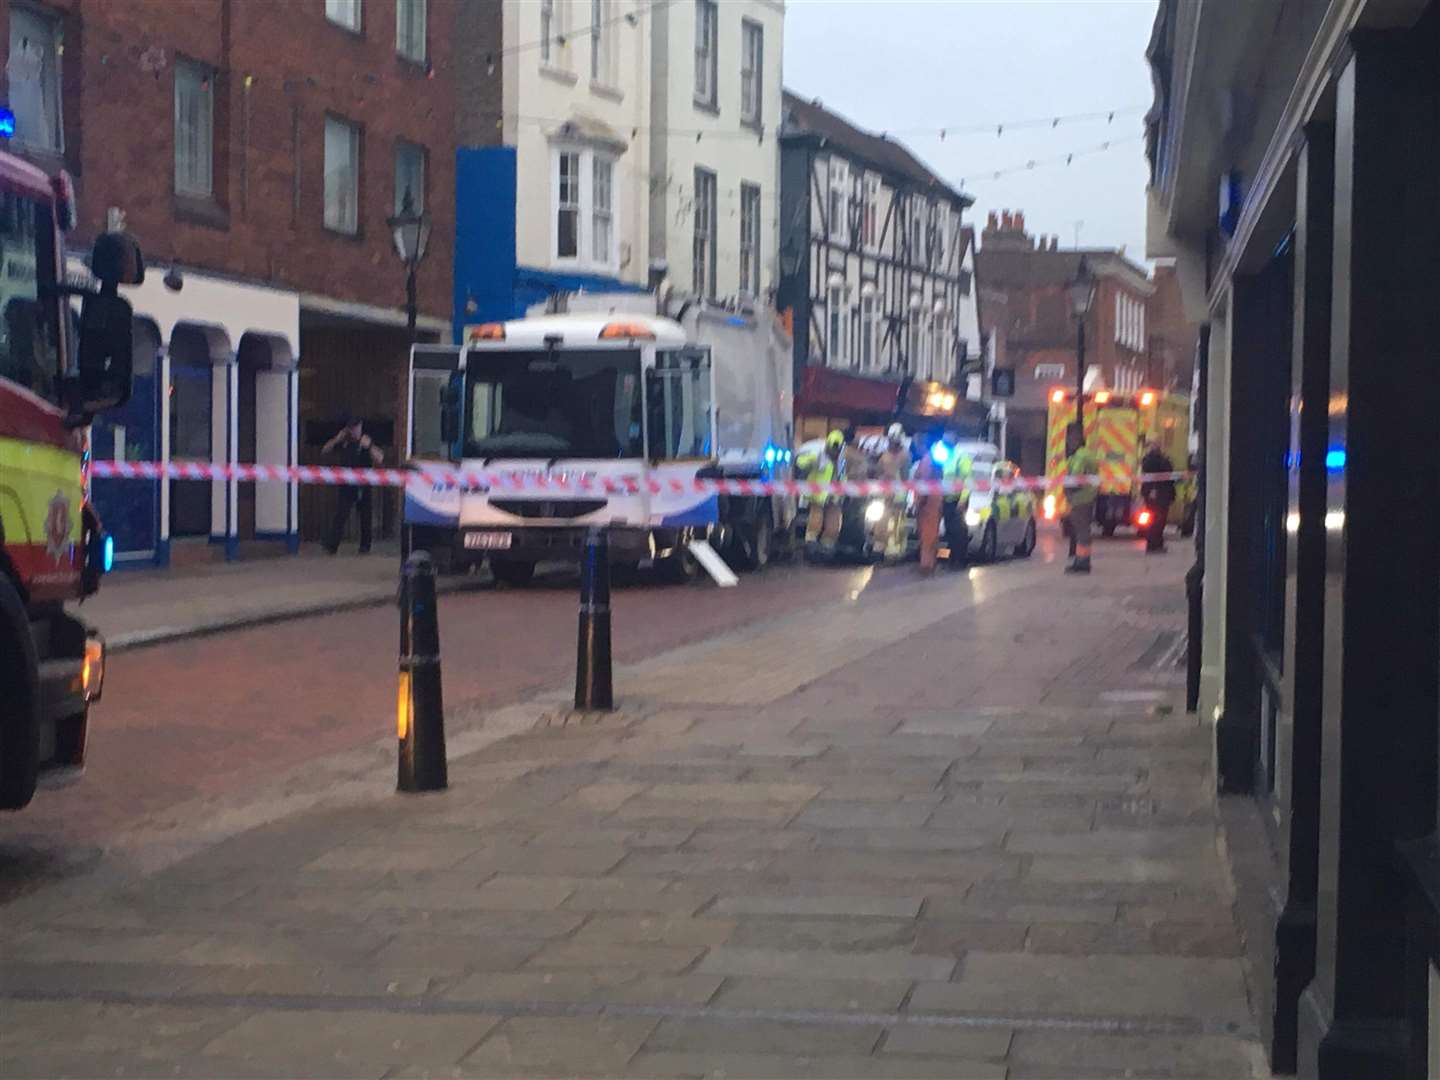 The emergency services were called to Rochester High Street